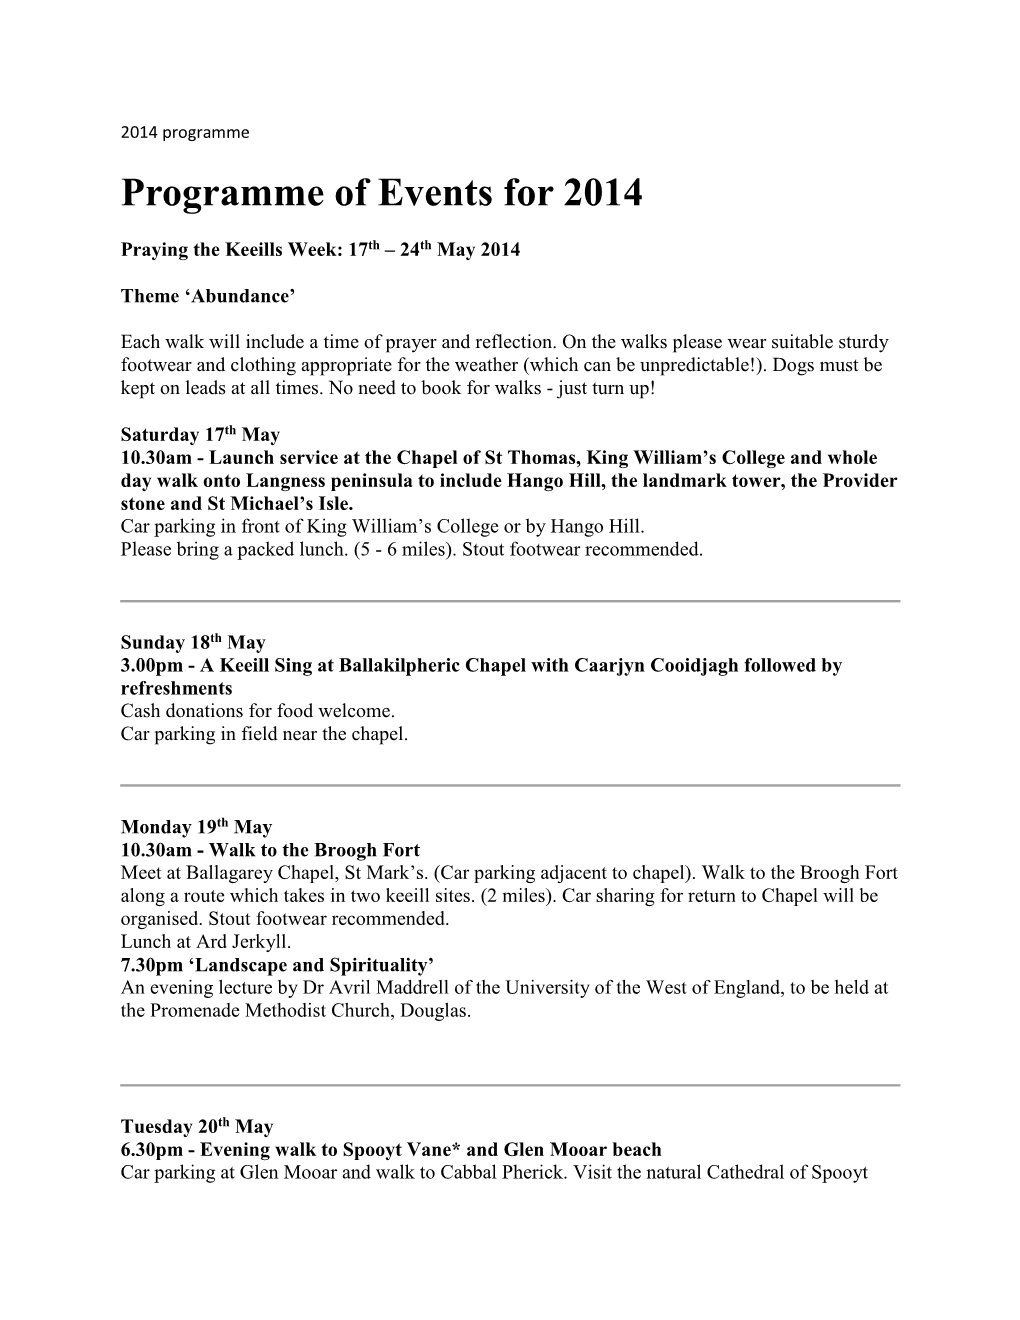 2014 Programme Programme of Events for 2014